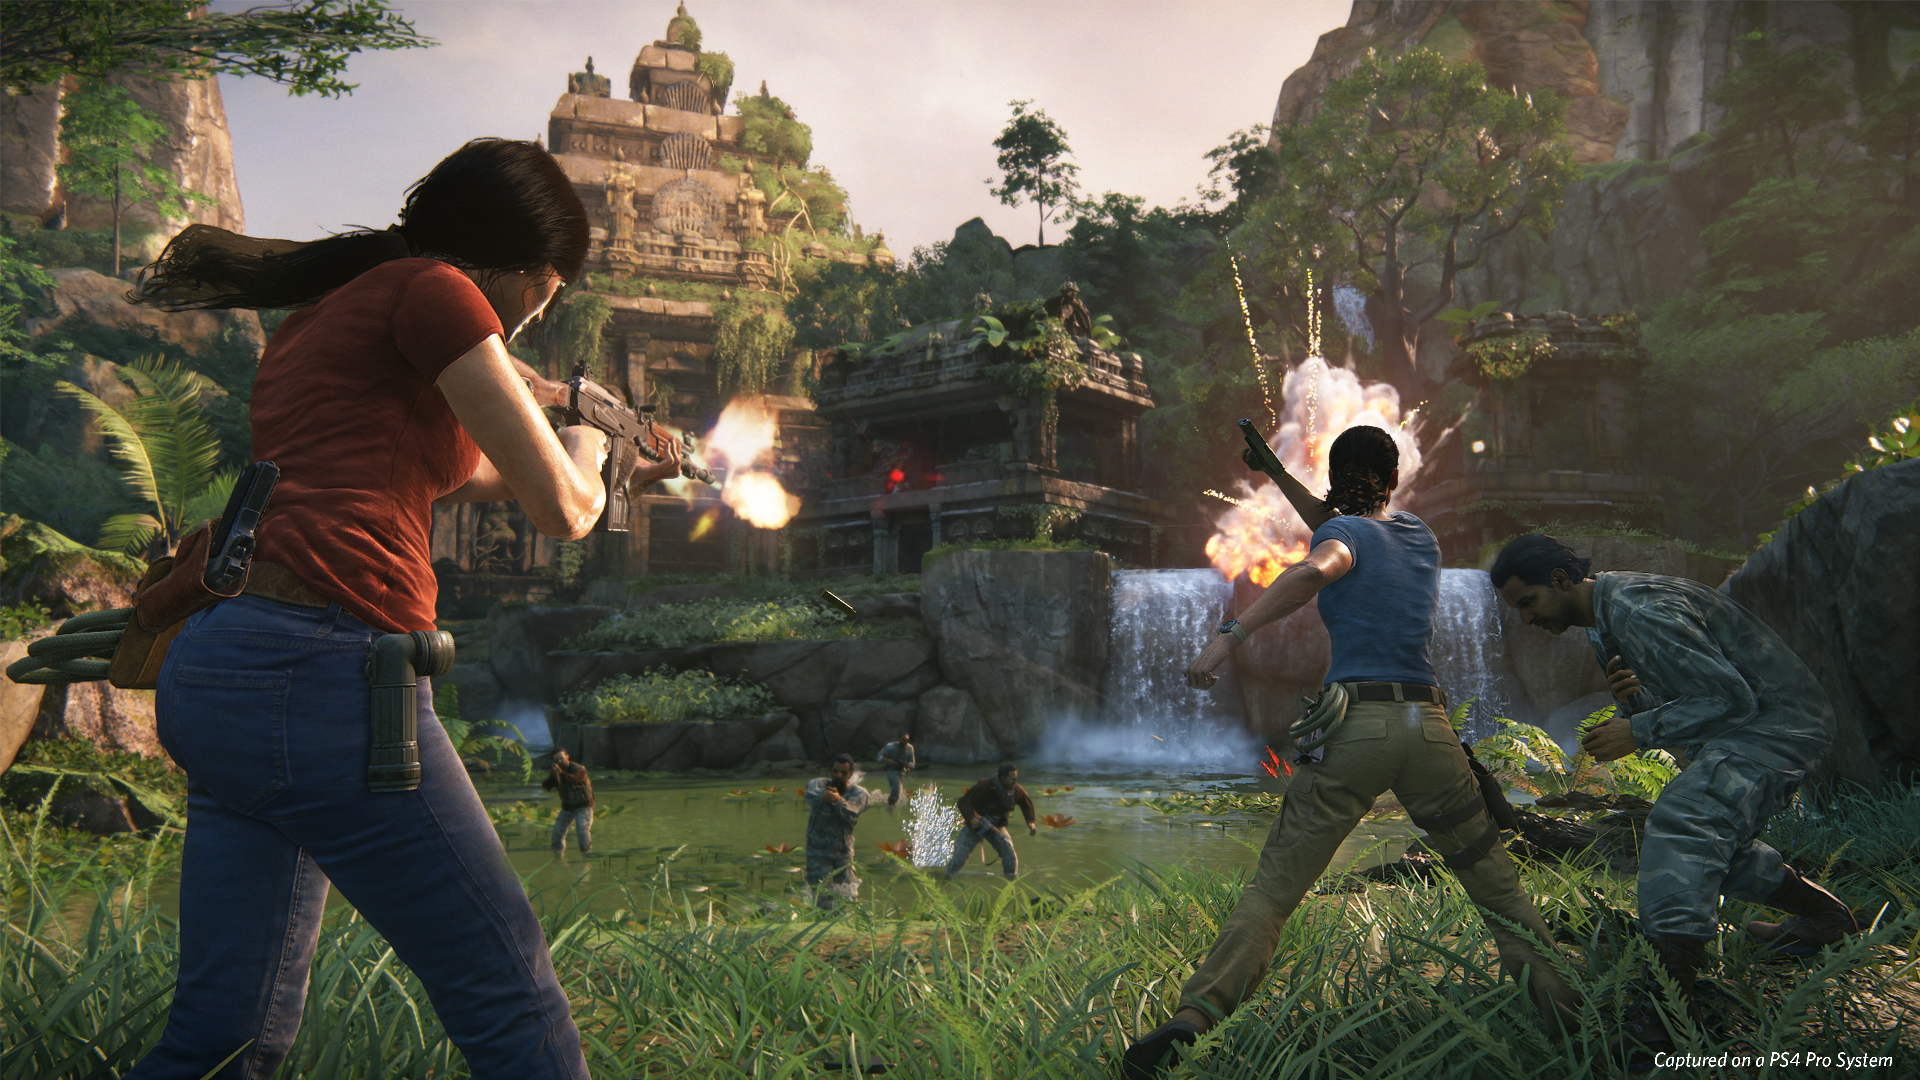 loan Discomfort heat UNCHARTED 4: A Thief's End & UNCHARTED: The Lost Legacy Digital Bundle